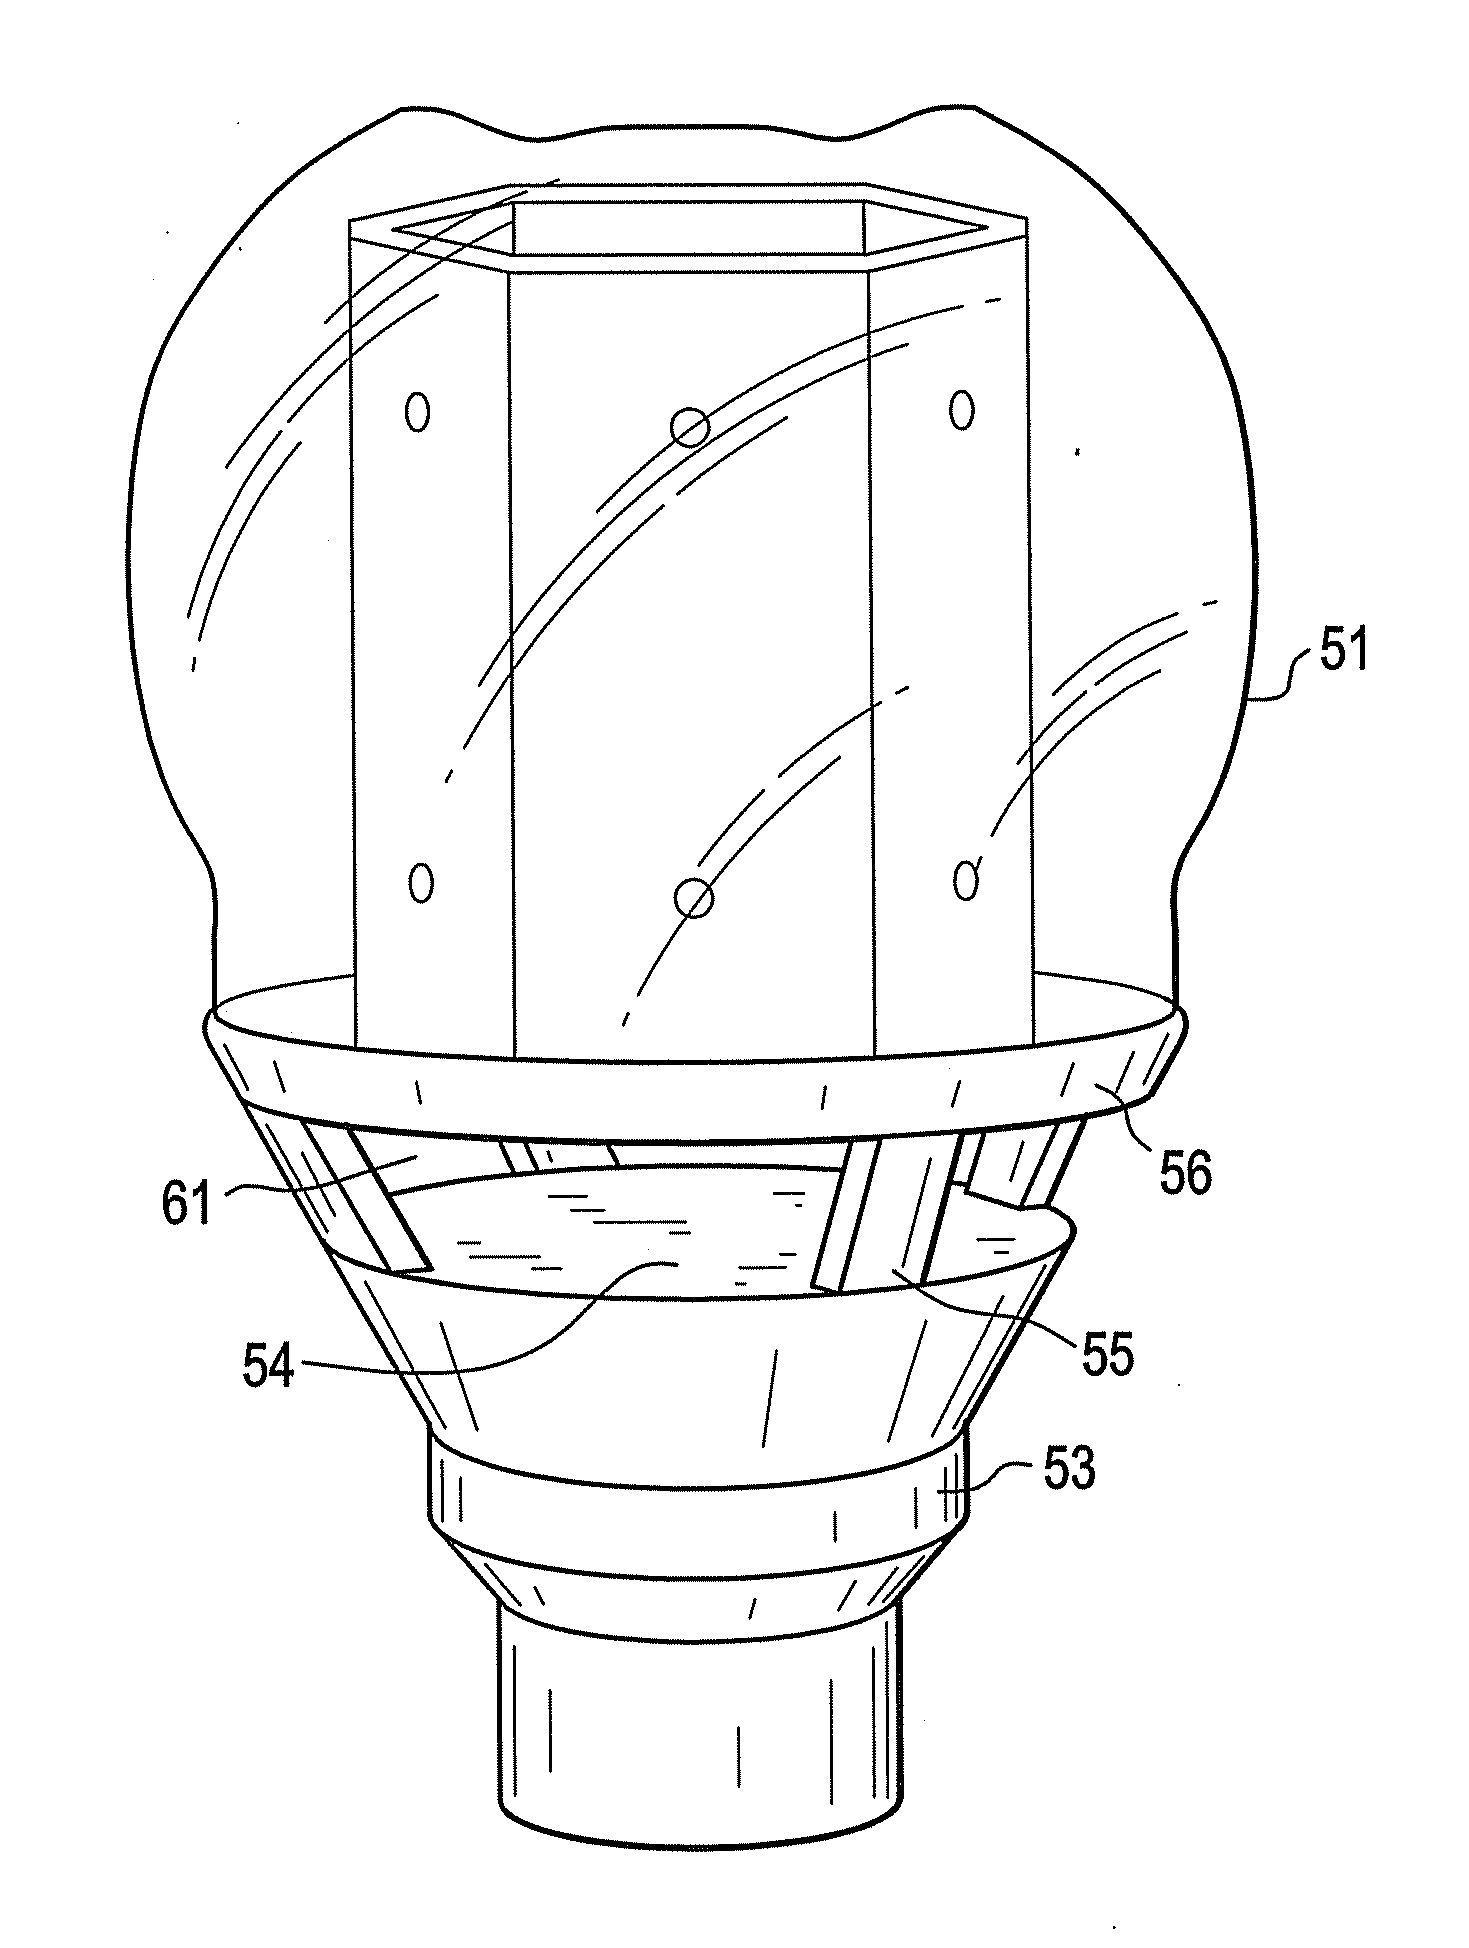 Heat sink structures, lighting elements and lamps incorporating same, and methods of making same